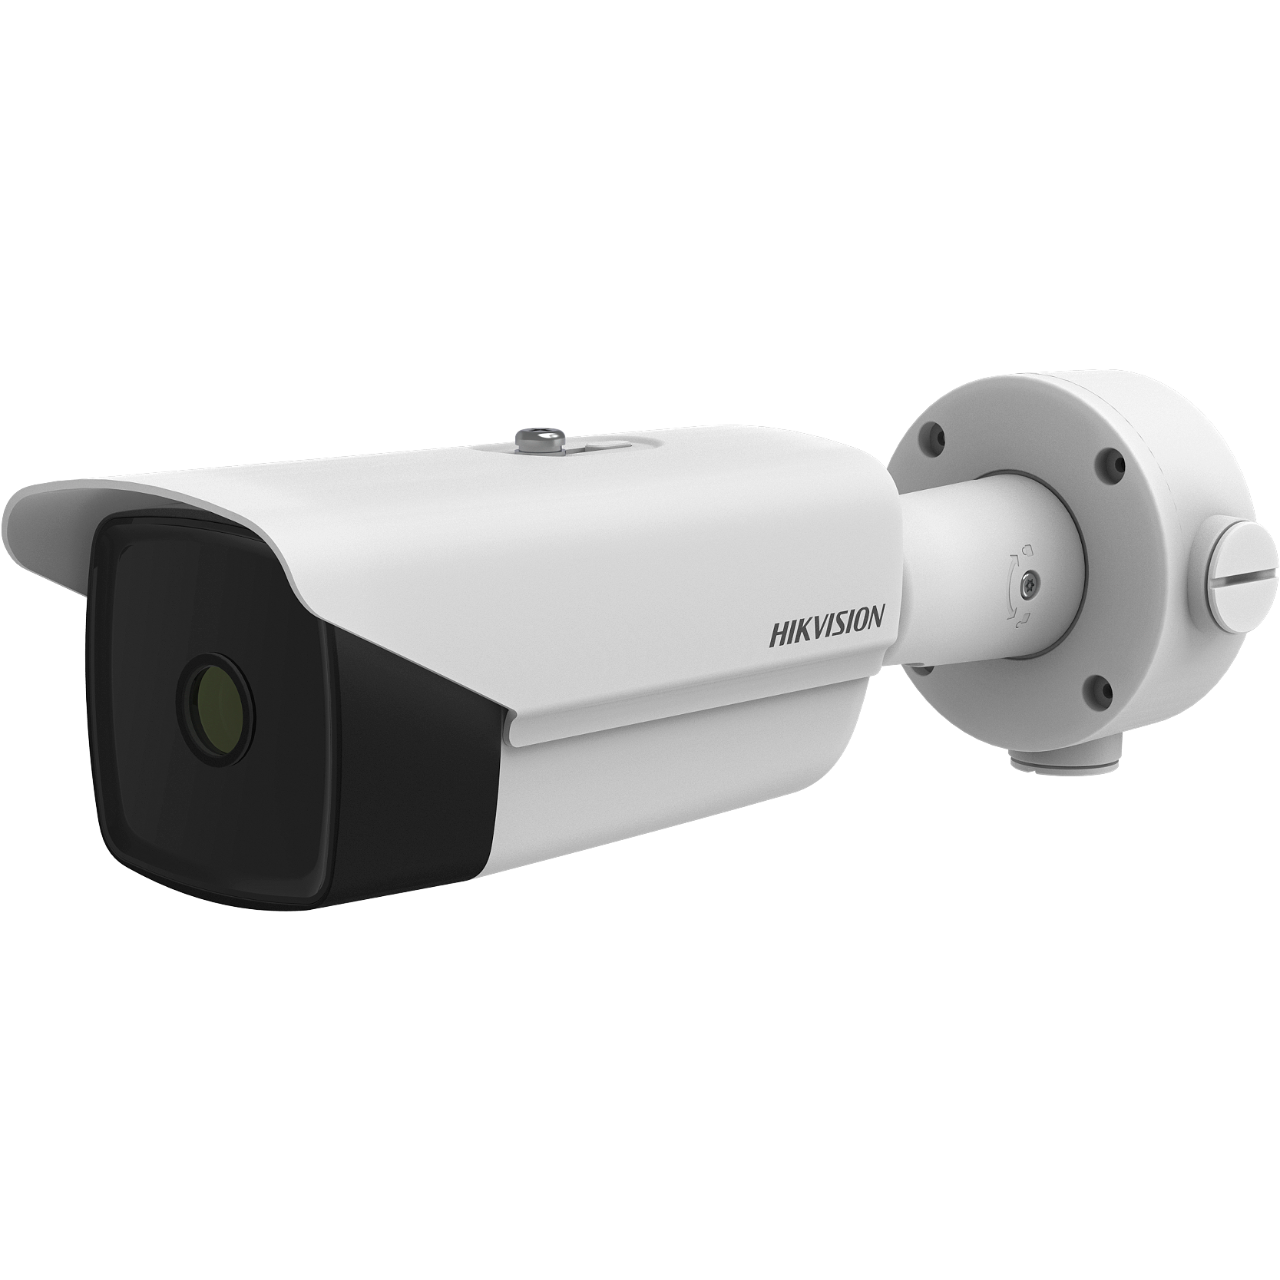 DS-2TD2137-4/P. Hikvision Thermal Network Bullet Camera. #AS